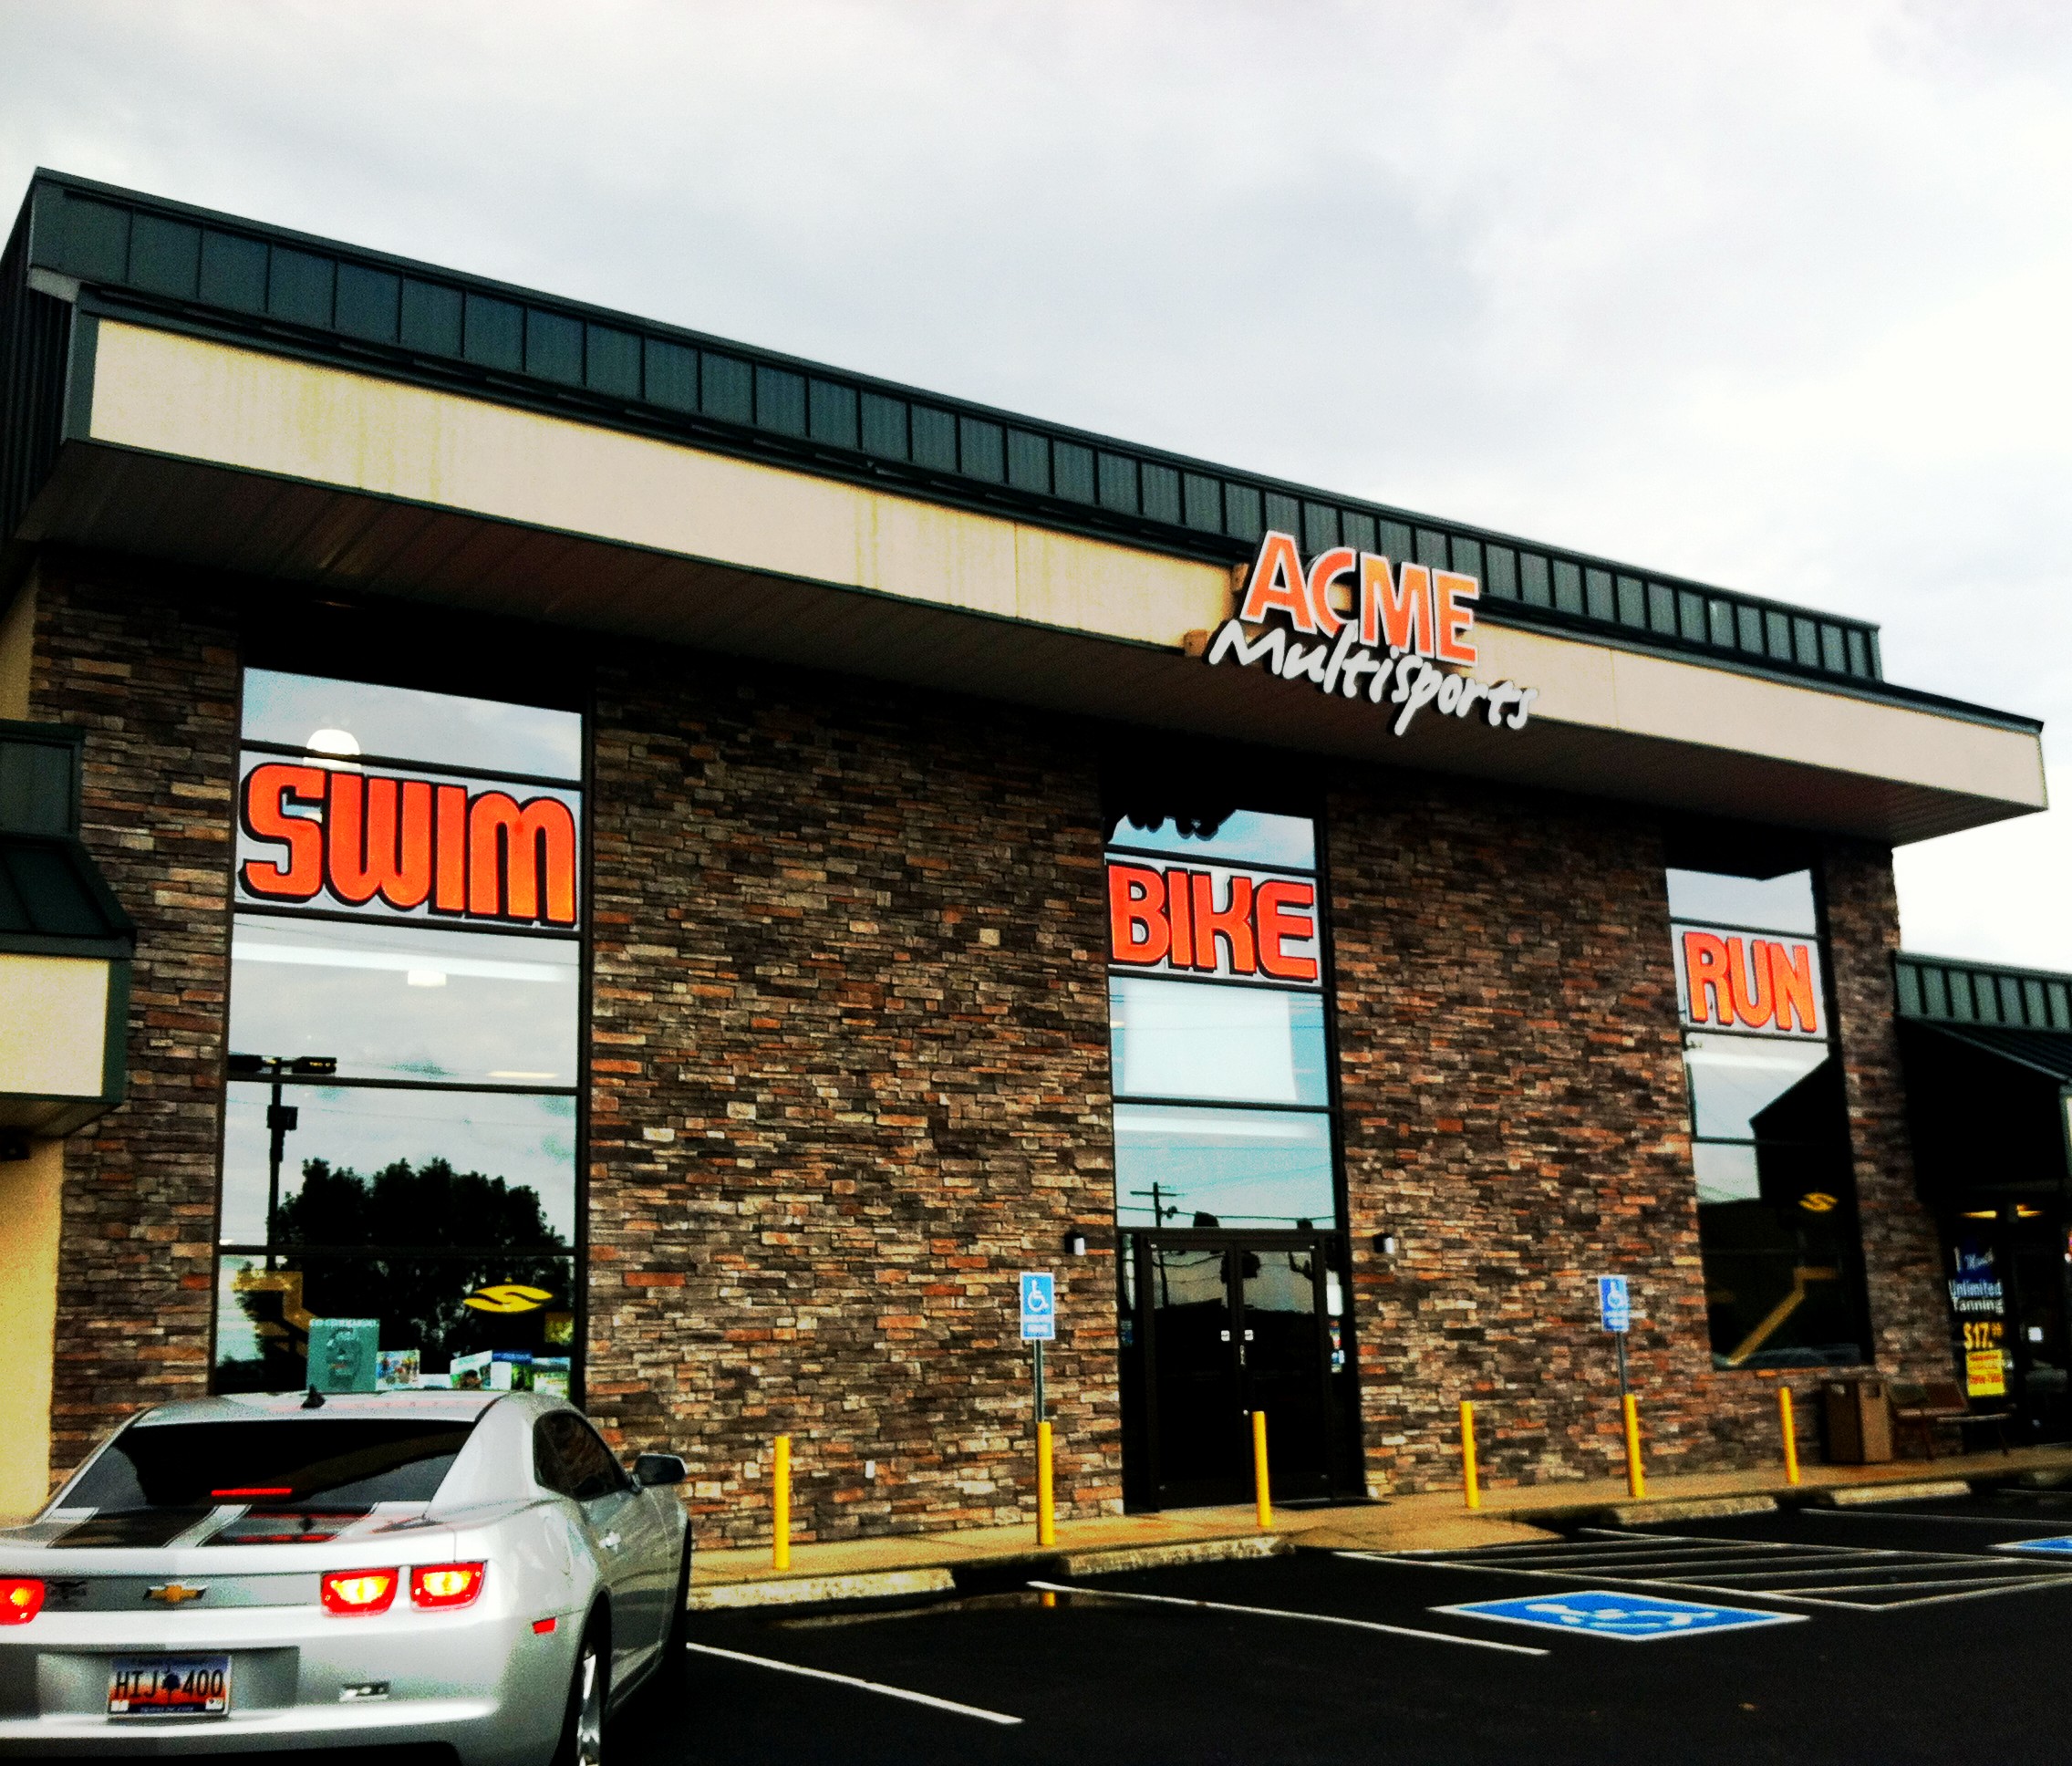 at Acme Multisports in Goodlettsville, TN were awesome and very helpful